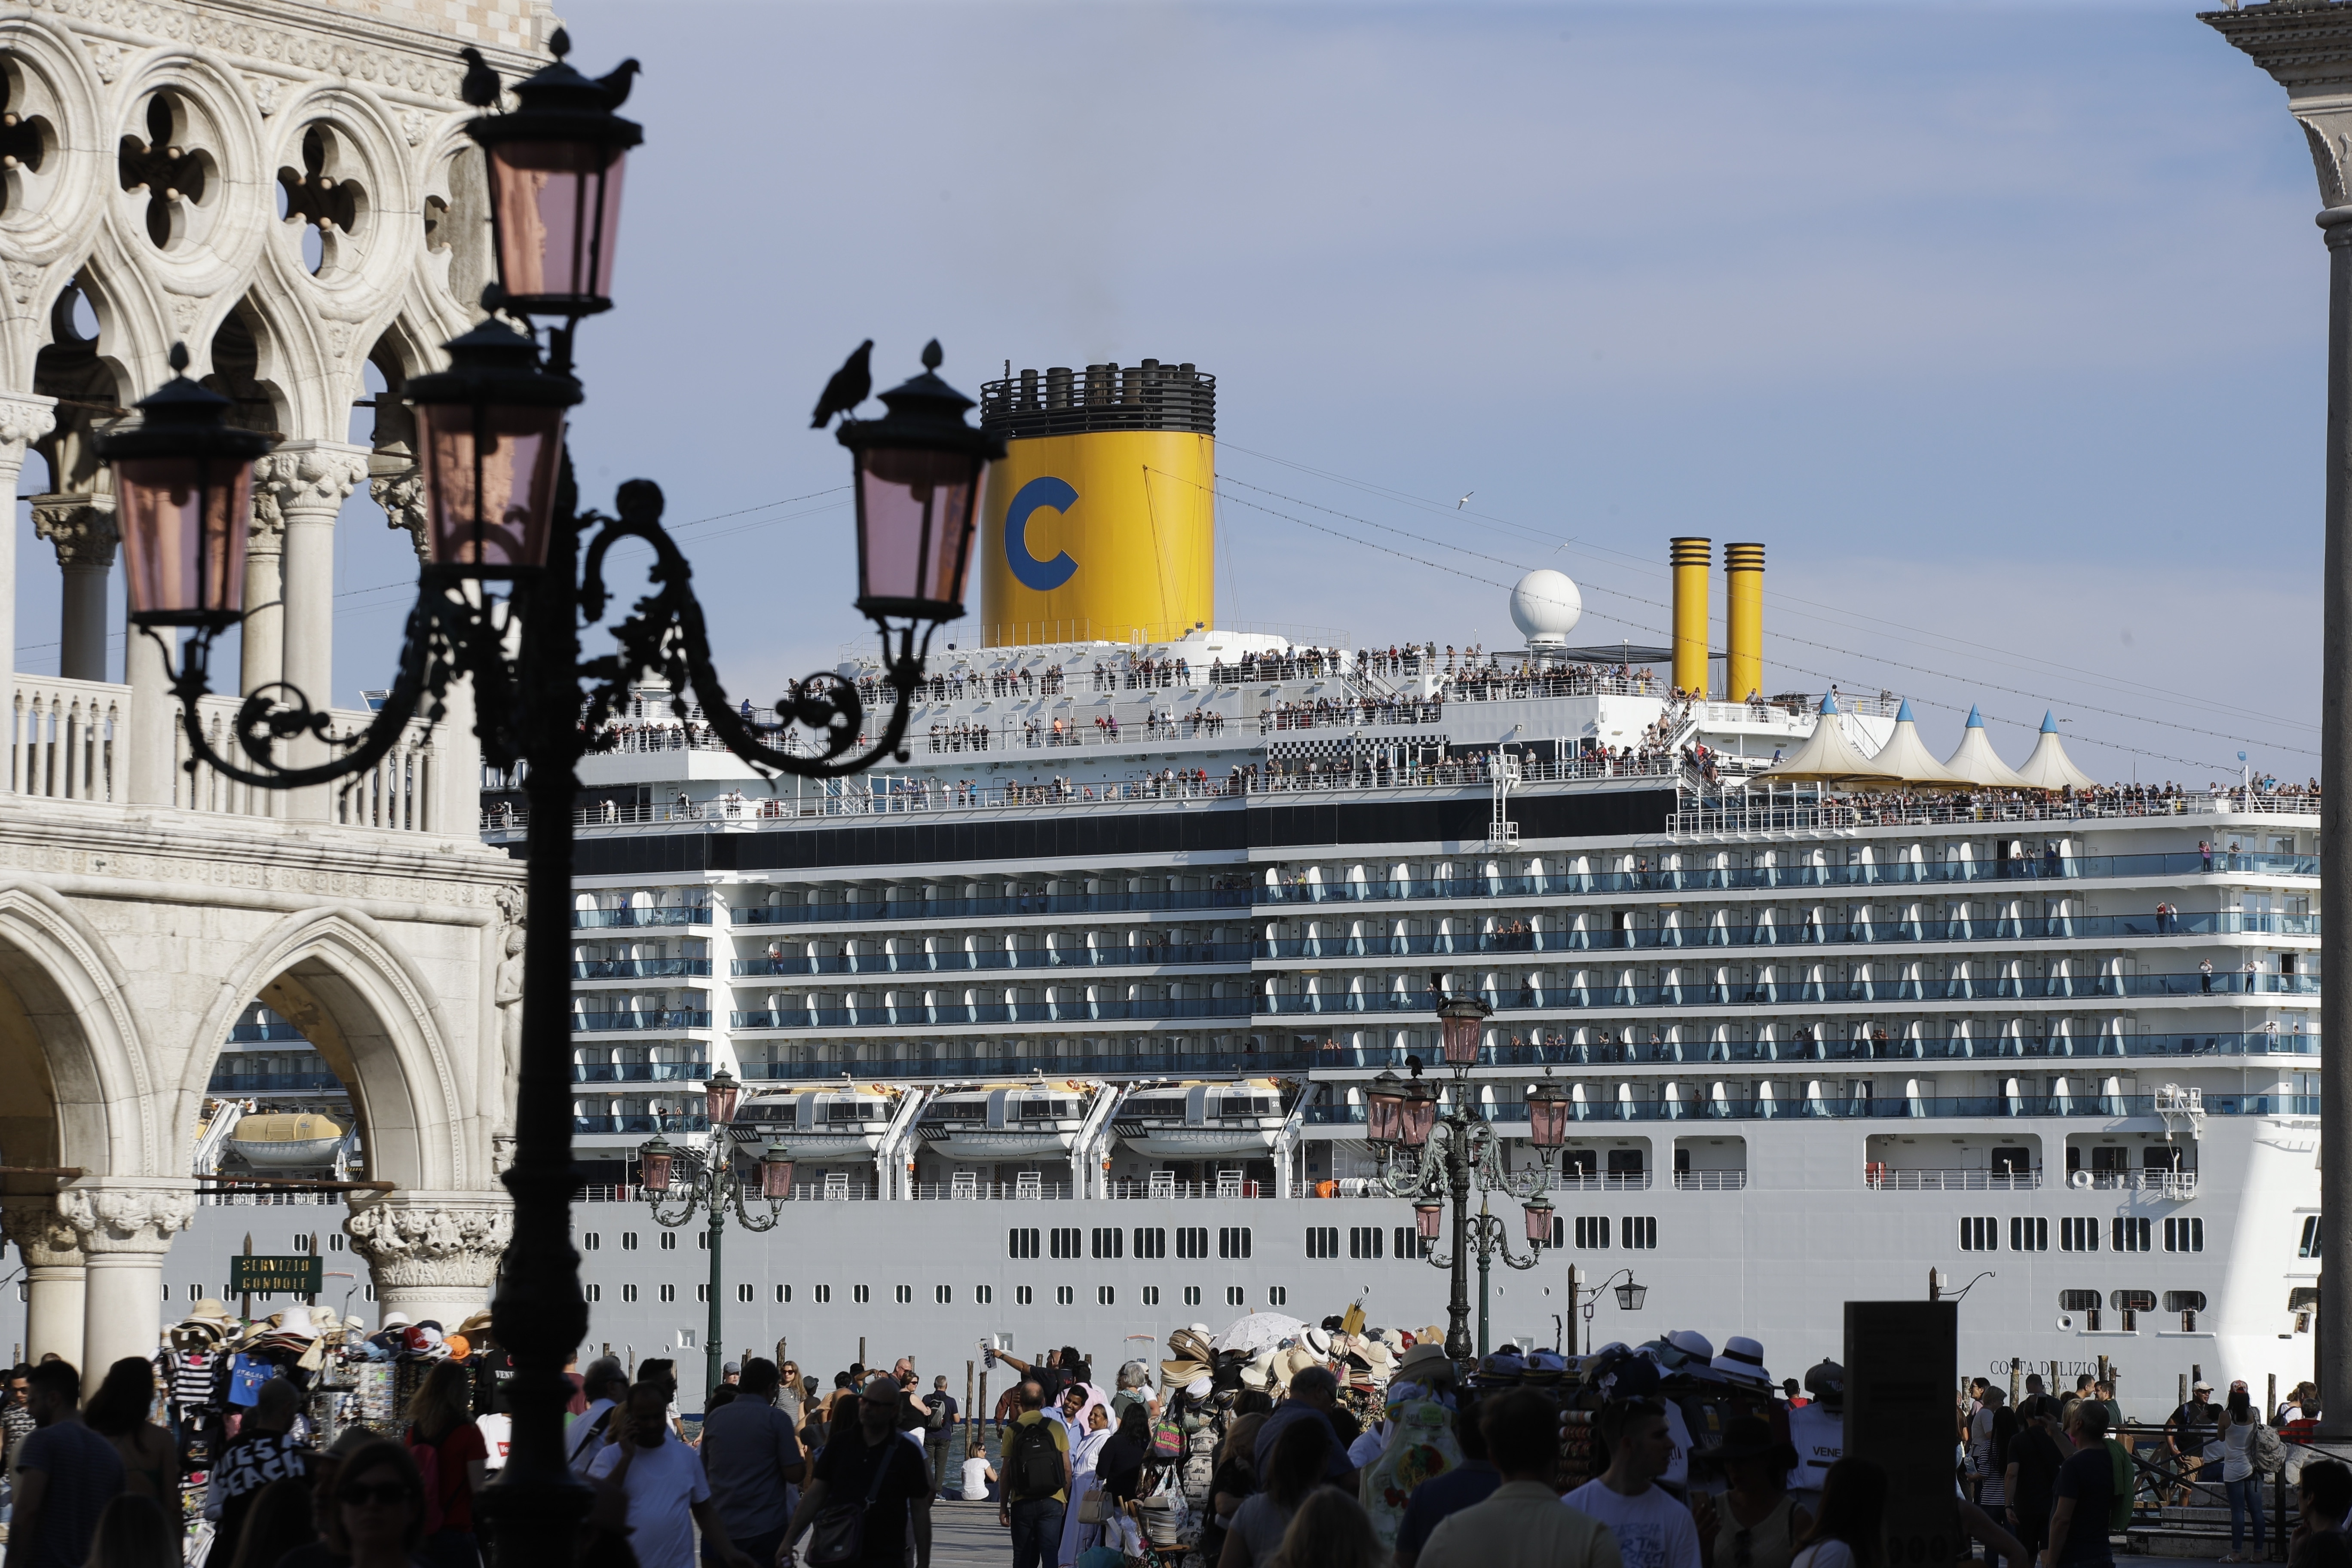 A cruise ship passes by St. Mark's Square filled with tourists, in Venice, Italy, Sunday, June 2, 2019. Groups that want to ban cruise ships on Venice's busy canals say a collision that injured four tourists has served as a wake-up call. Opponents say cruise ships are out-of-scale for Venice, cause pollution, threaten the lagoon's ecosystem and dangerous. (AP Photo/Luca Bruno)